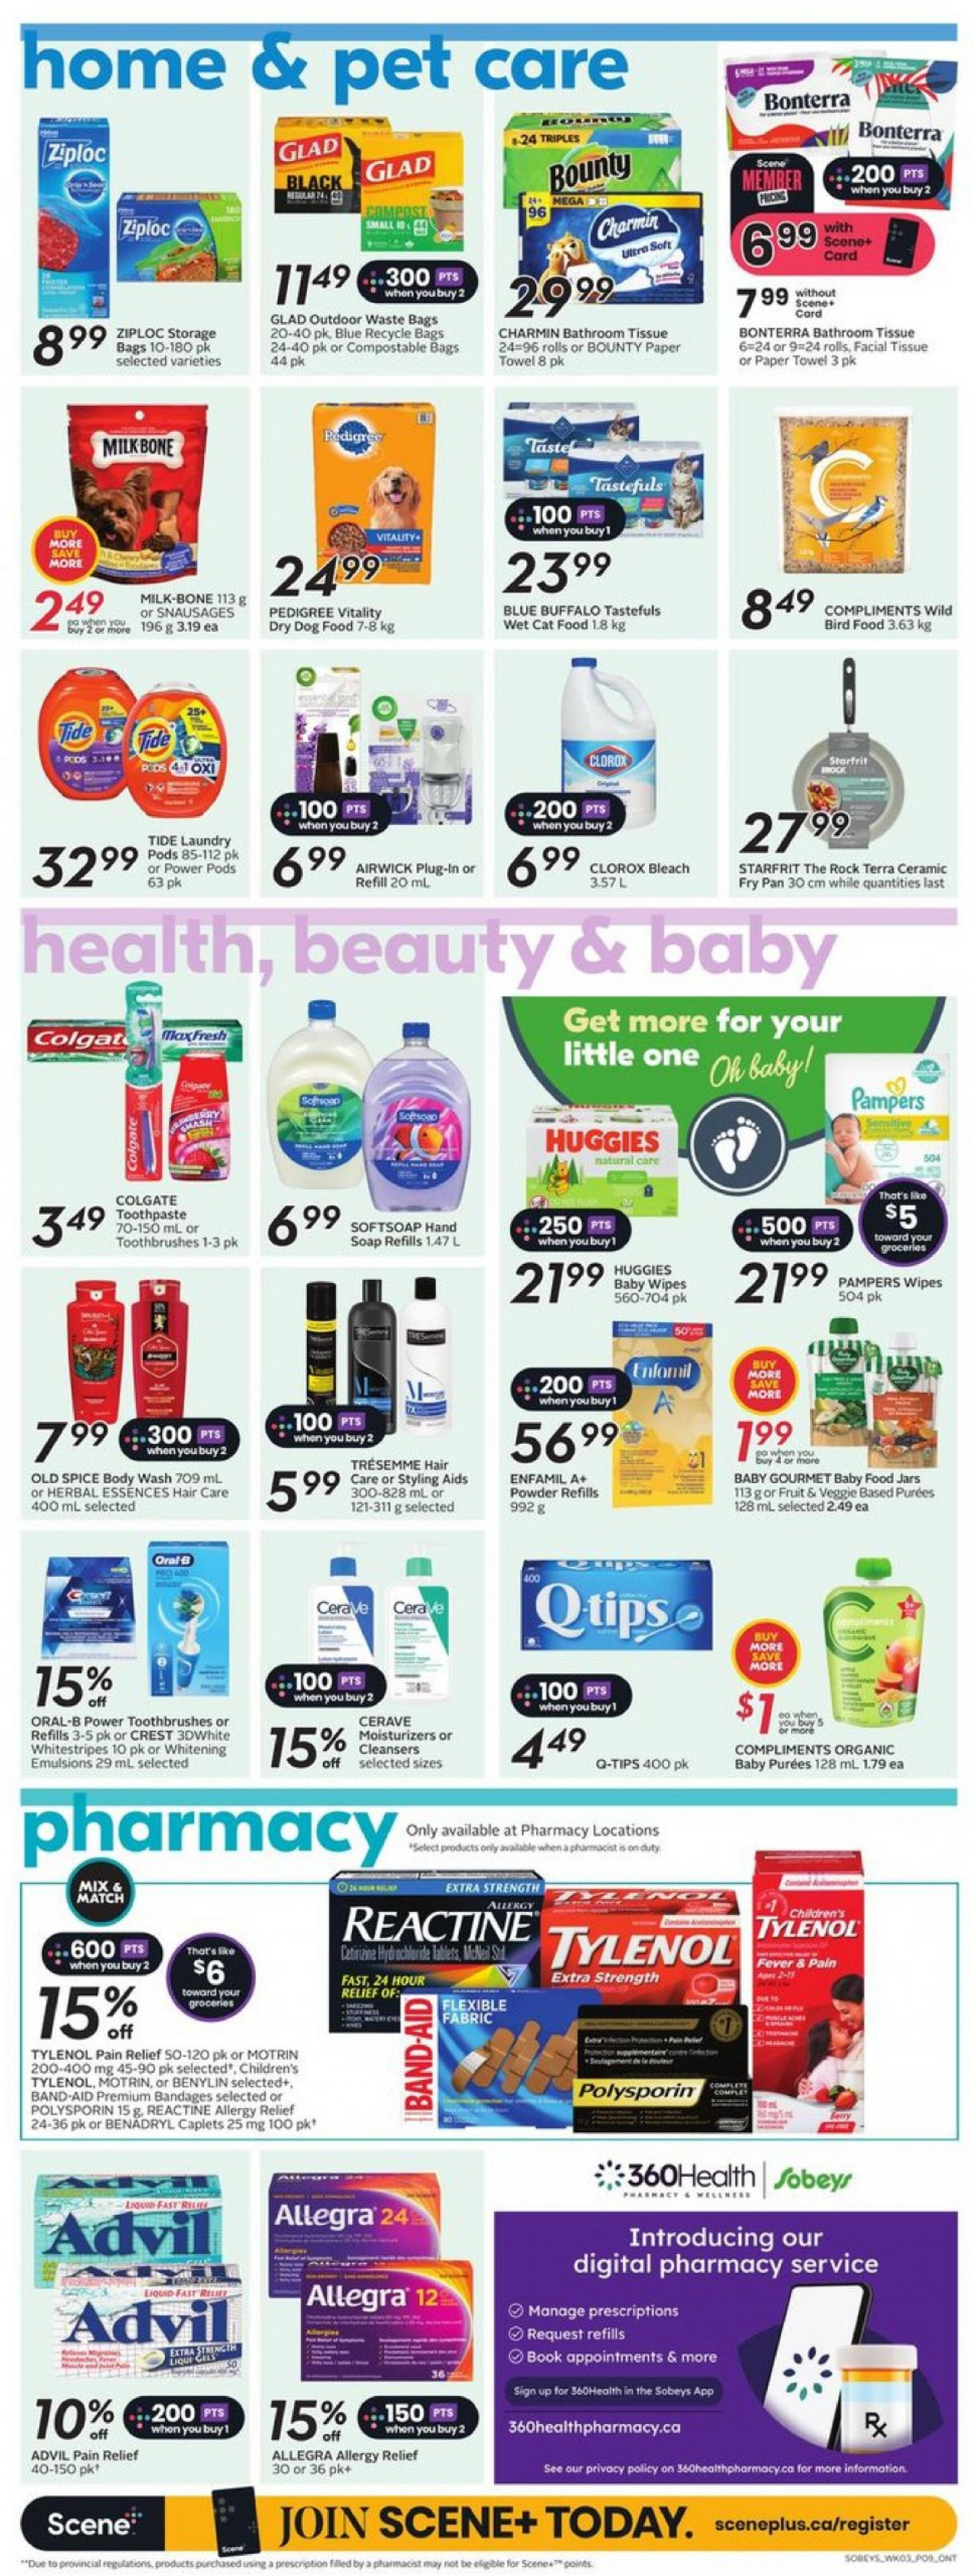 sobeys - Sobeys - Weekly Flyer - Ontario flyer current 16.05. - 22.05. - page: 19